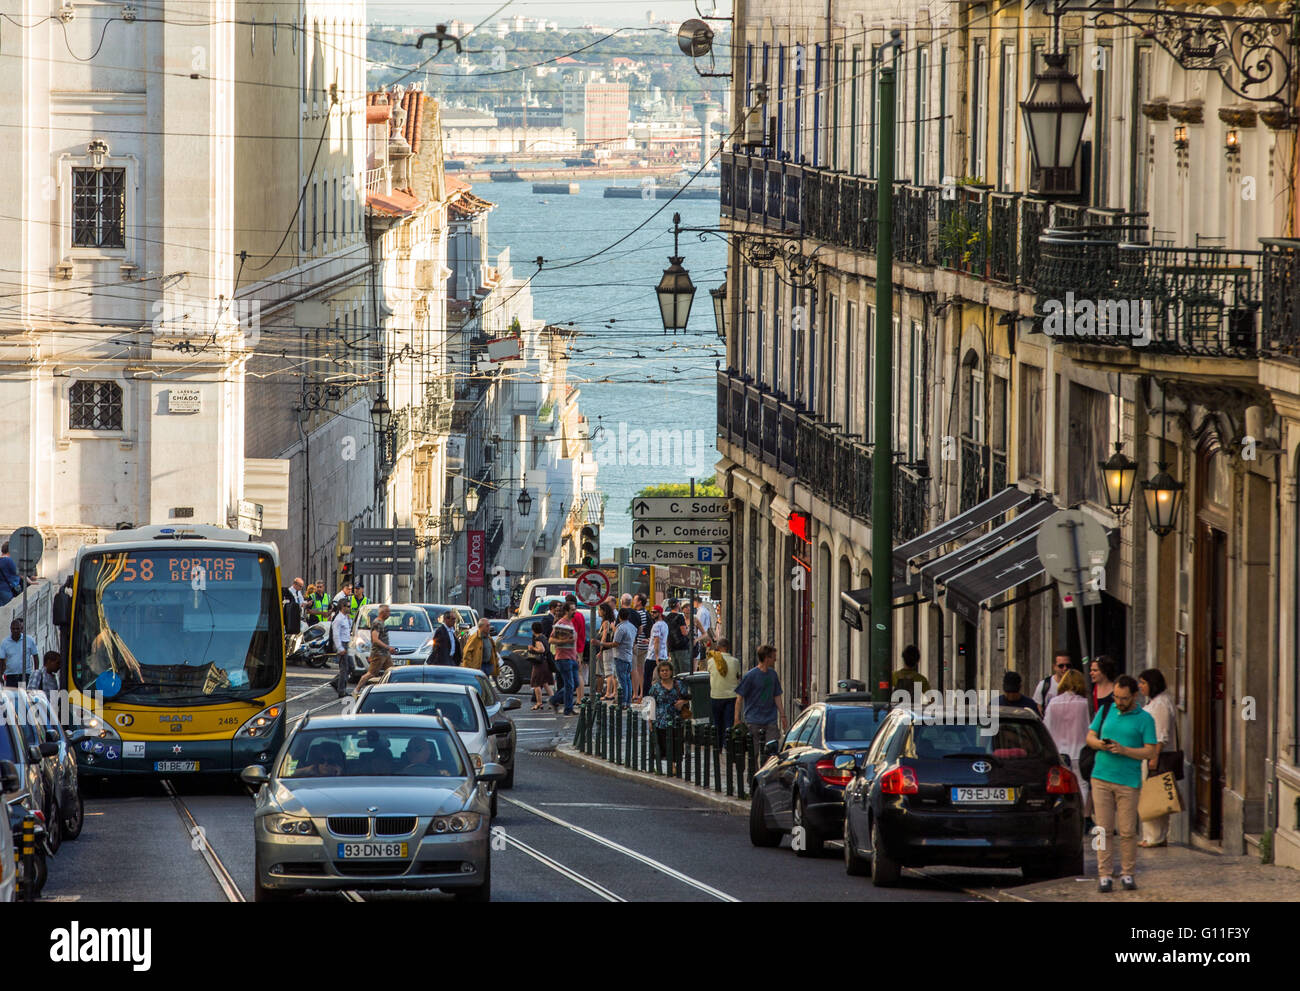 Lisbon, Portugal. 27th May, 2015. The historic district of Lisbon, Portugal, 27 May 2015. Photo: JENS BUETTNER/dpa - NO WIRE SERVICE -/dpa/Alamy Live News Stock Photo